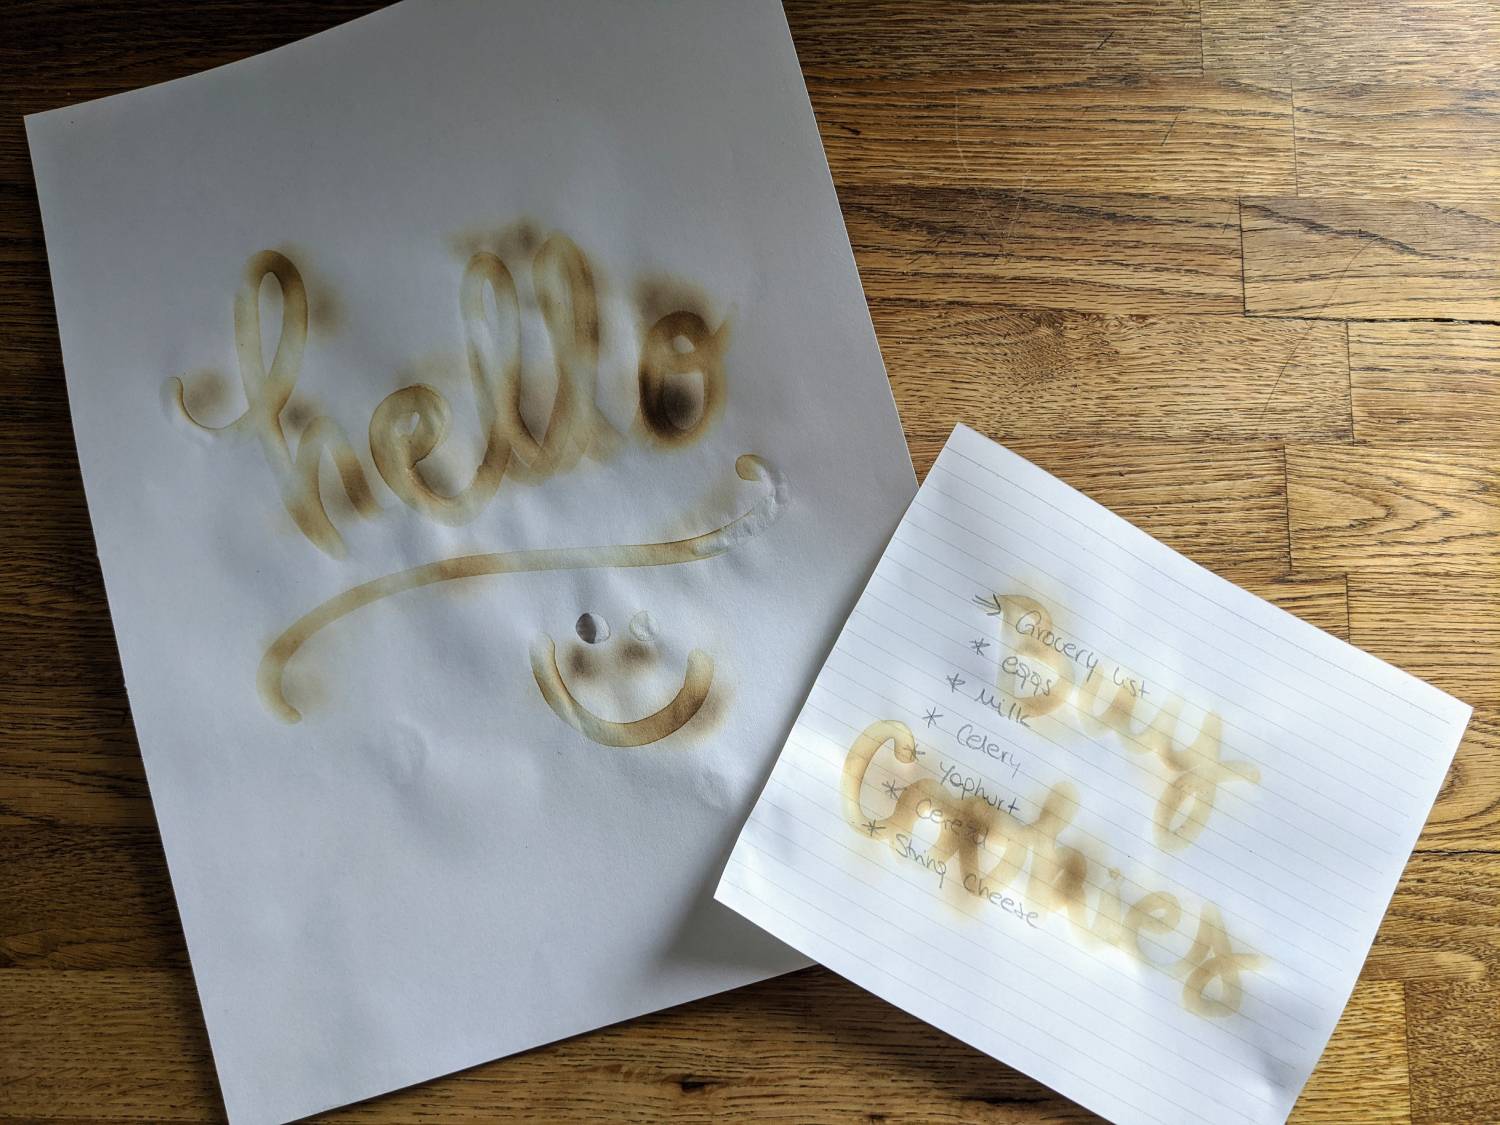 Stay-at-home science project: Leave secret messages with invisible ink